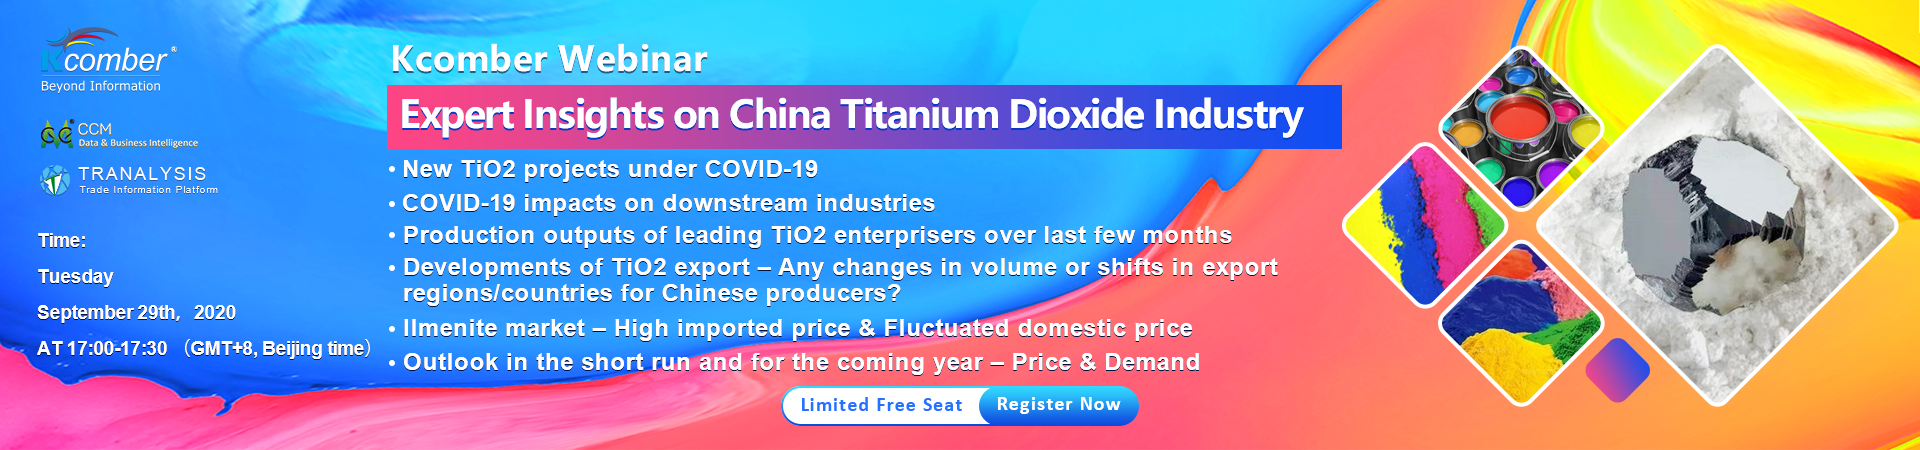 Expert Insights on China Titanium Dioxide Industry